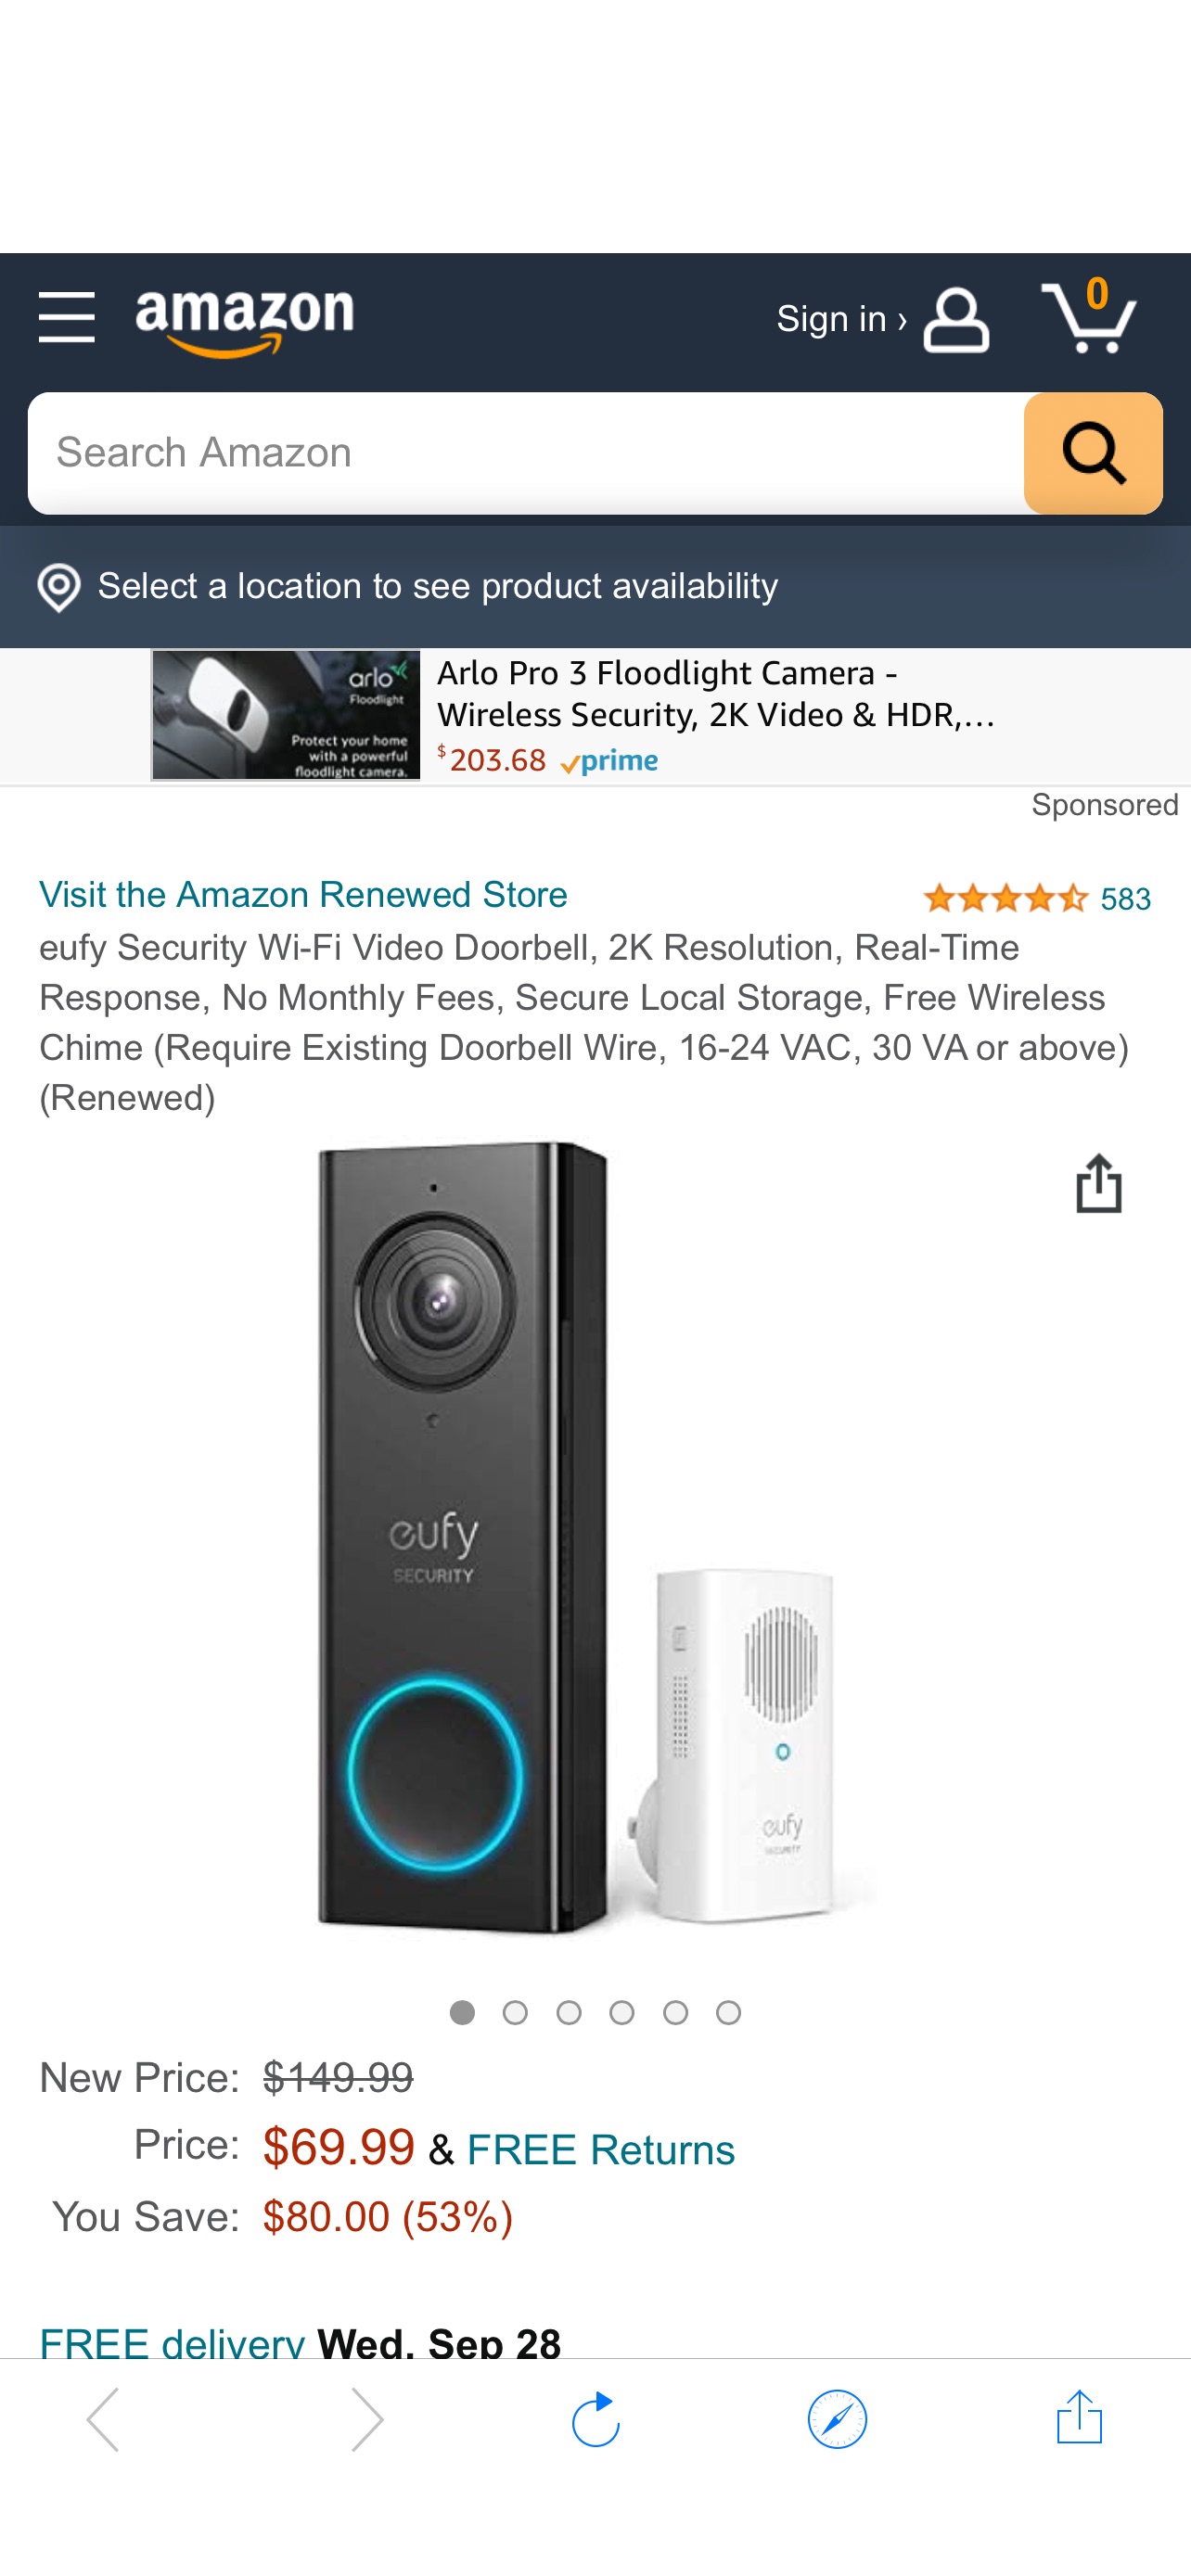 Amazon.com : eufy Security Wi-Fi Video Doorbell, 2K Resolution, Real-Time Response, No Monthly Fees, Secure Local Storage, Free Wireless Chime